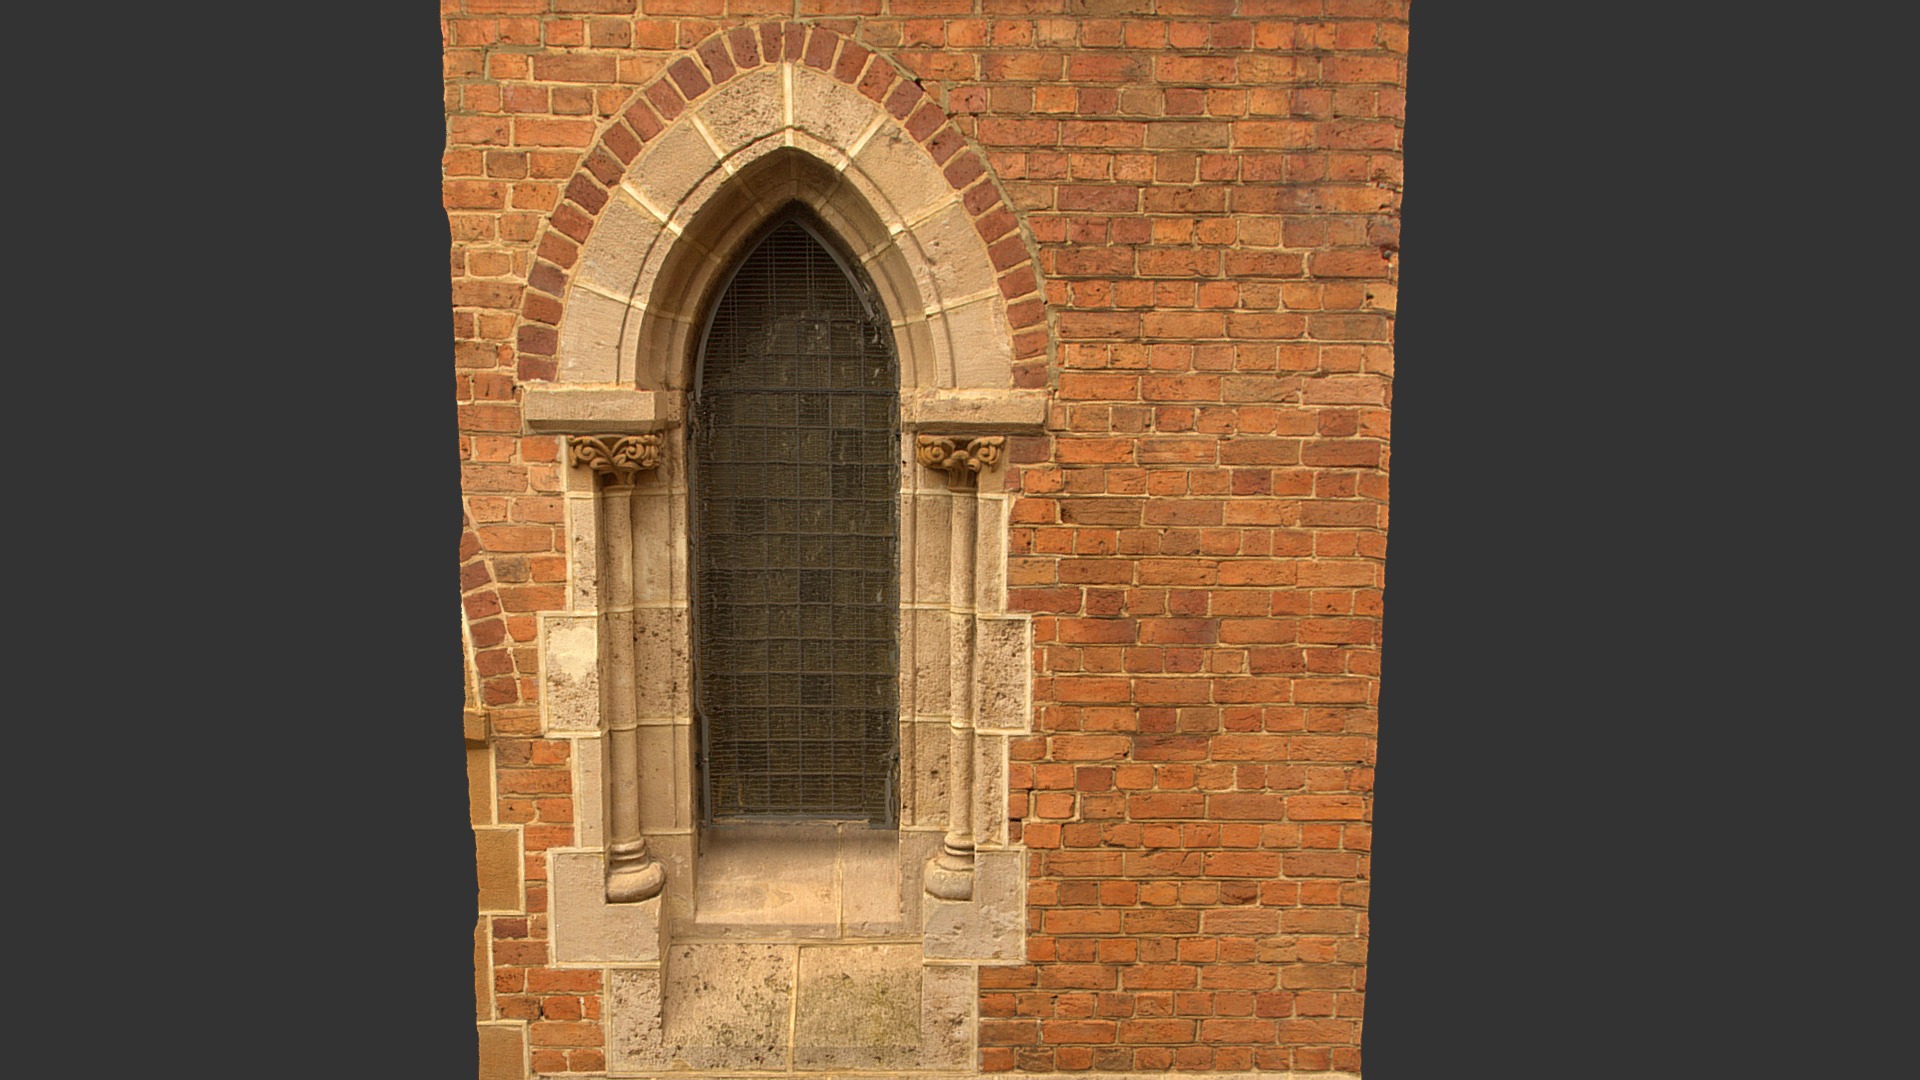 3D model Church door - This is a 3D model of the Church door. The 3D model is about a brick building with a large arched window.